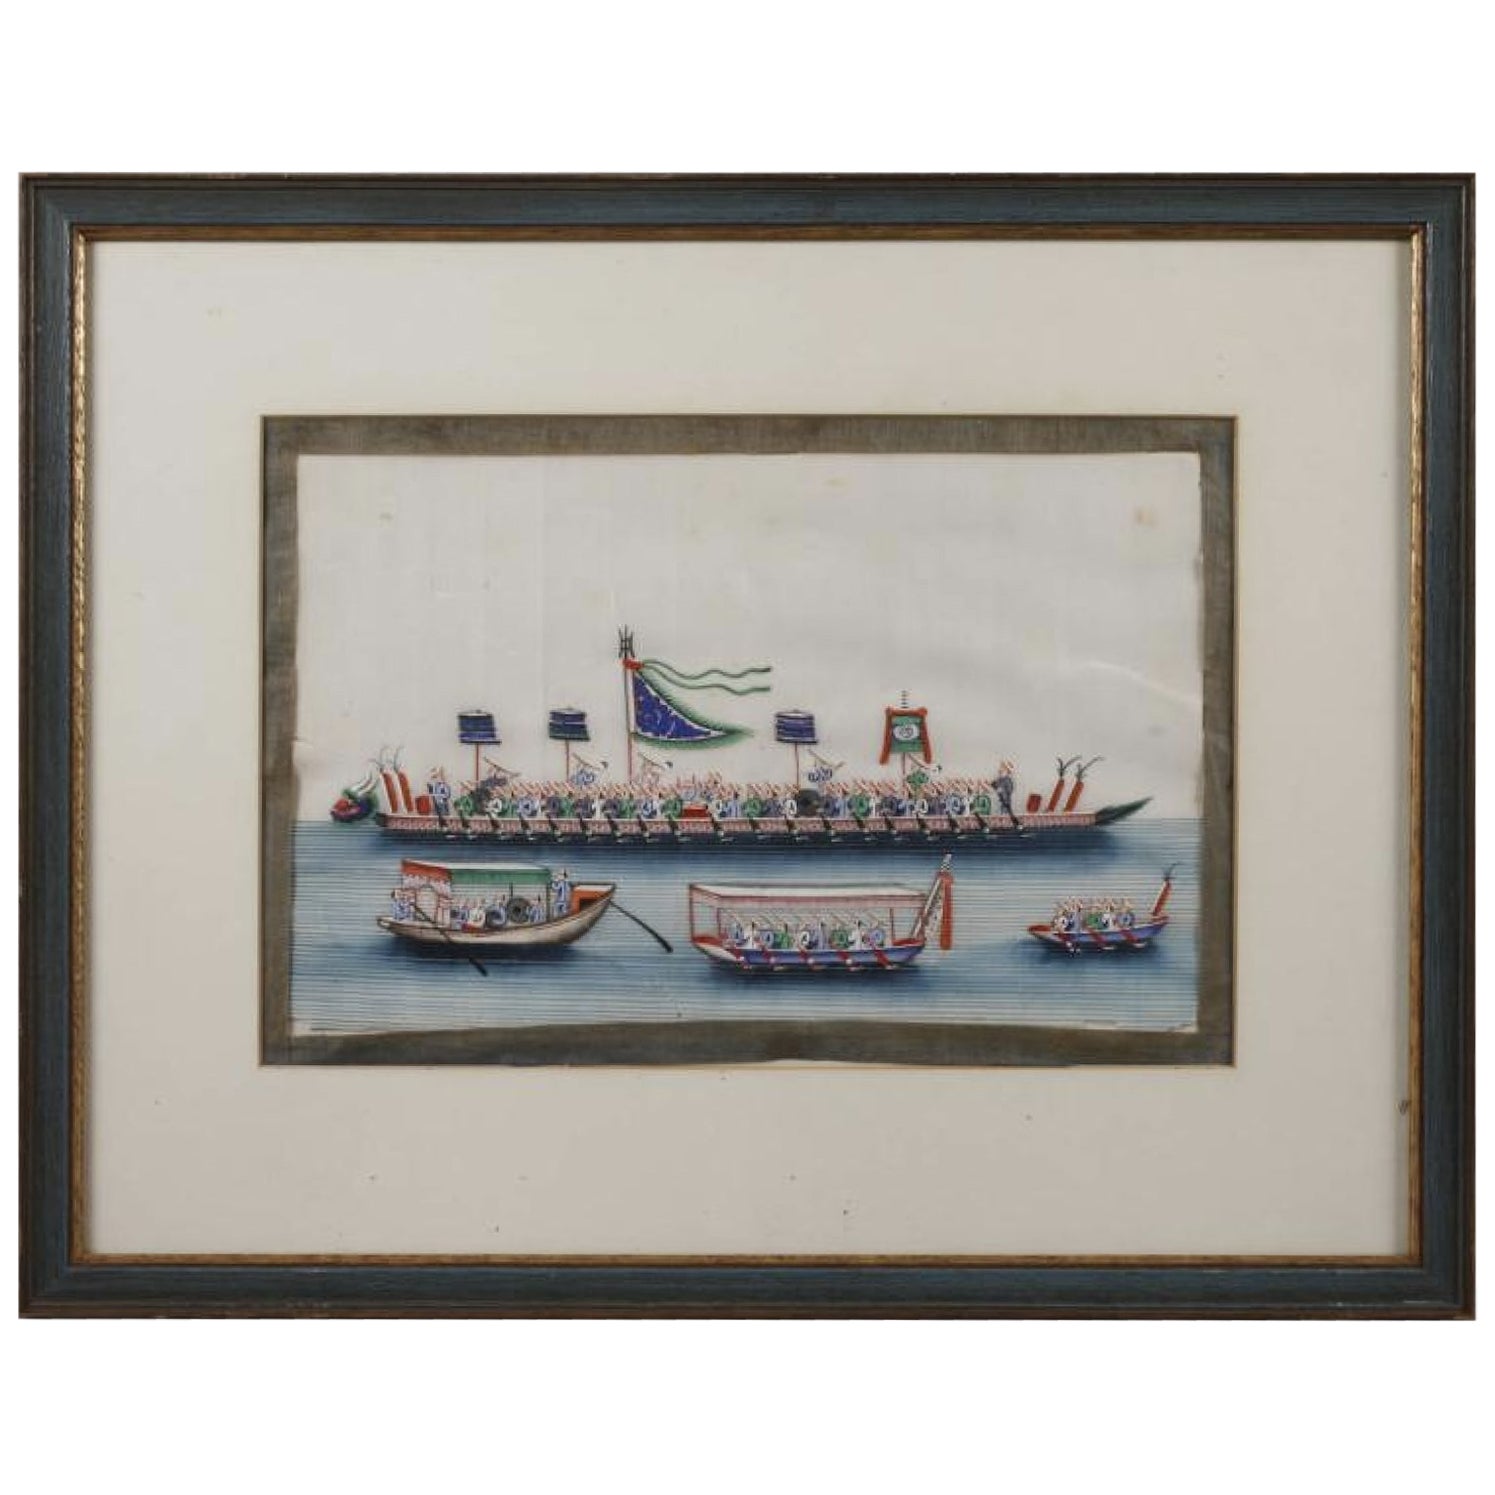 Gouache on Ricepaper of the Chinese Imperial Dragon Boat, 19th Century